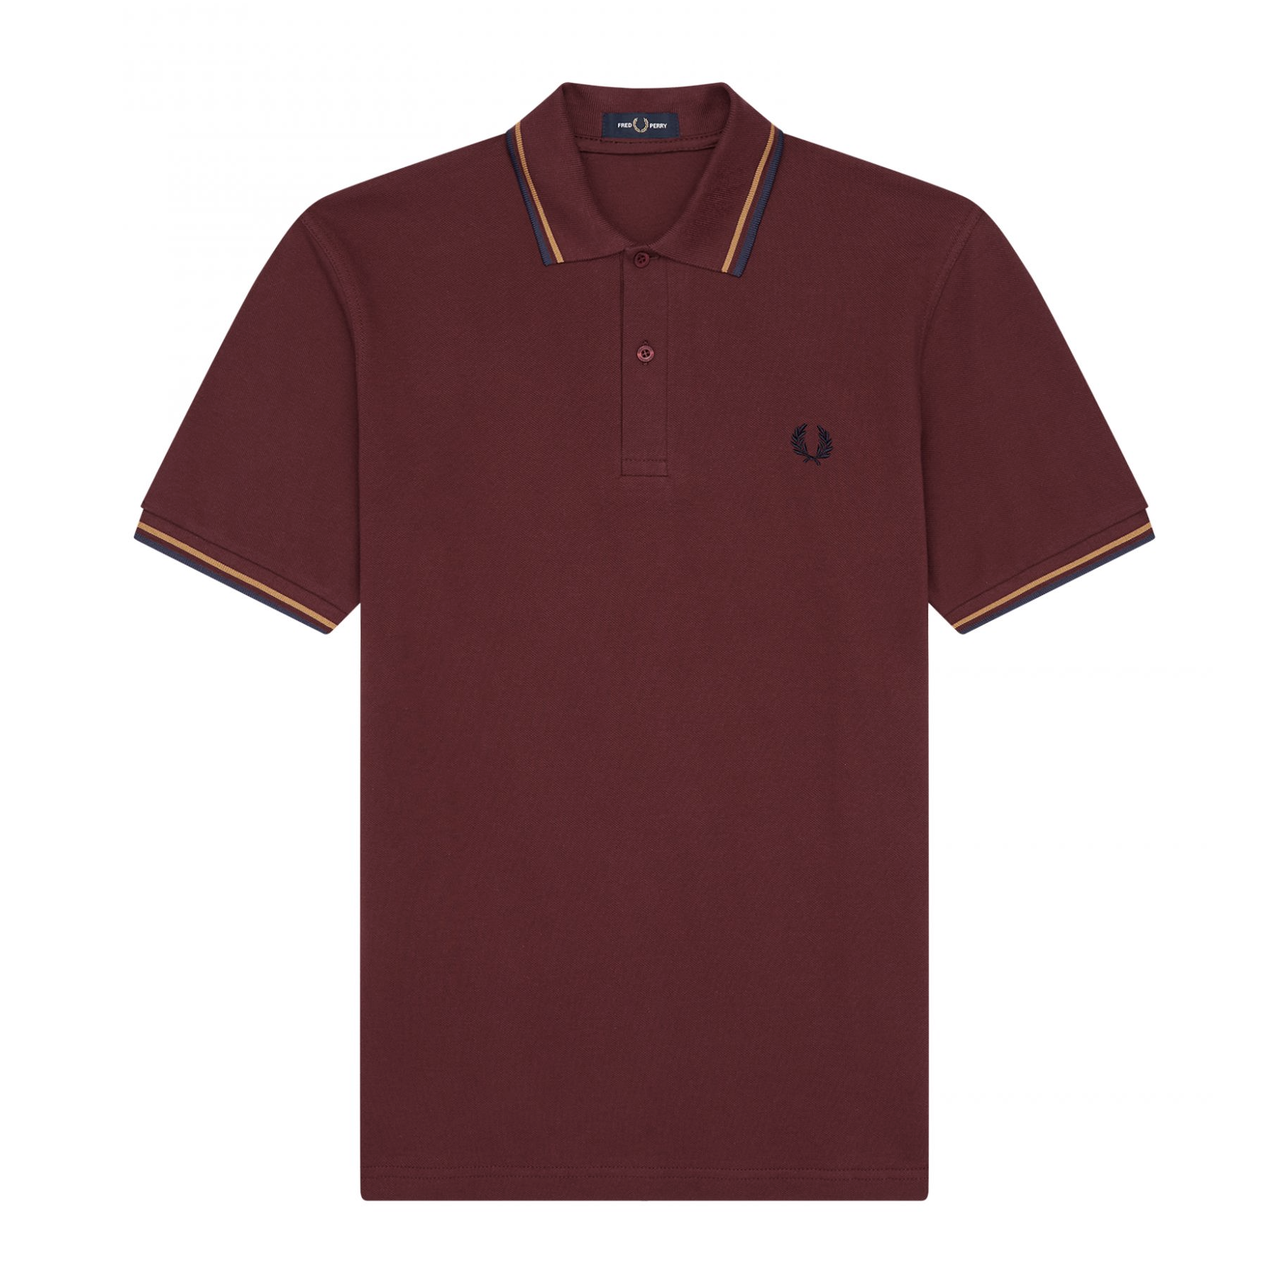 FRED PERRY TWIN TIPPED POLO SHIRT TAWNY PORT / GOLD